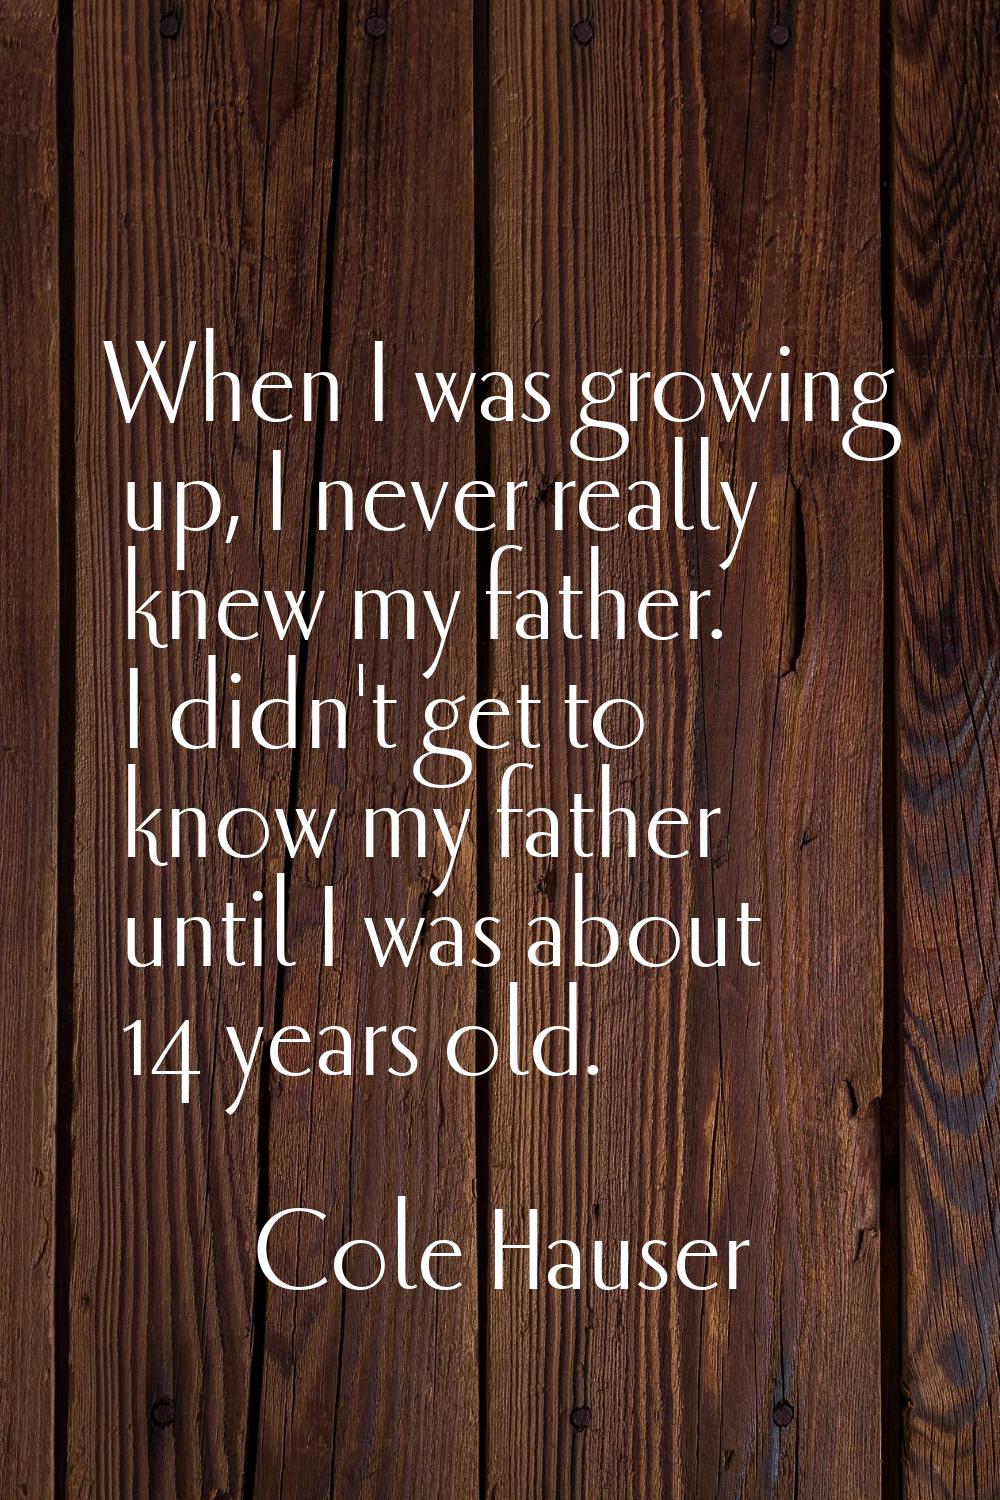 When I was growing up, I never really knew my father. I didn't get to know my father until I was ab